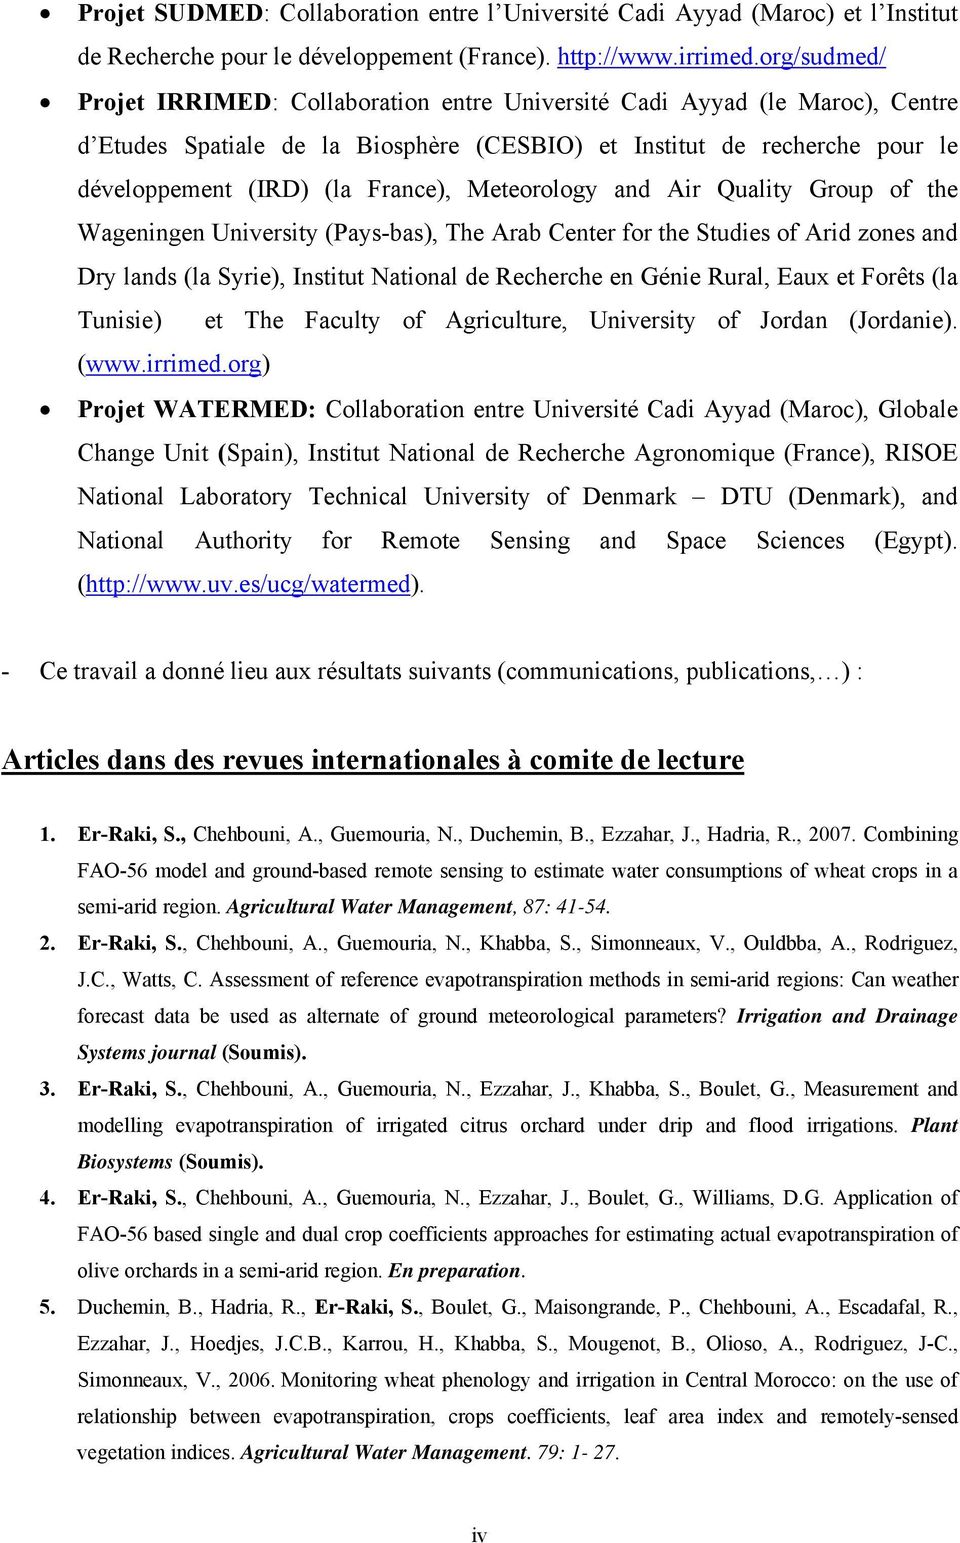 Meteorology and Air Quality Group of the Wageningen University (Pays-bas), The Arab Center for the Studies of Arid zones and Dry lands (la Syrie), Institut National de Recherche en Génie Rural, Eaux